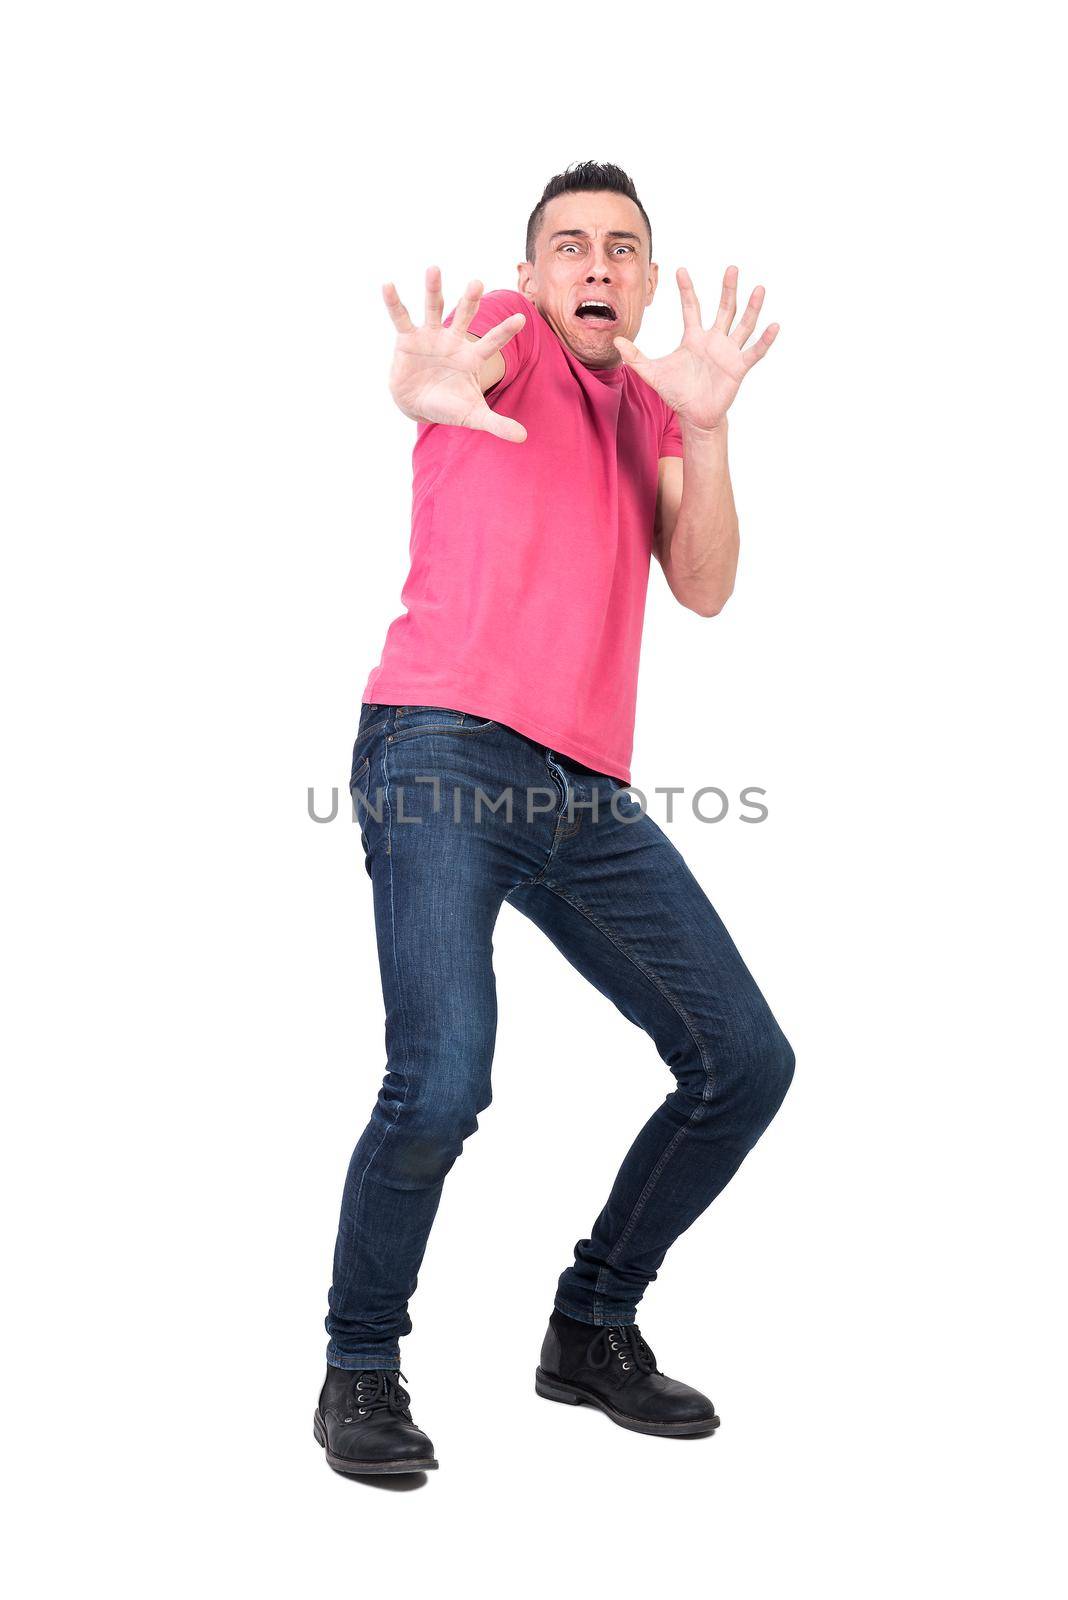 Terrified male in jeans and pink t shirt making protective gesture and shouting in panic while looking at camera and staggering back isolated on white background